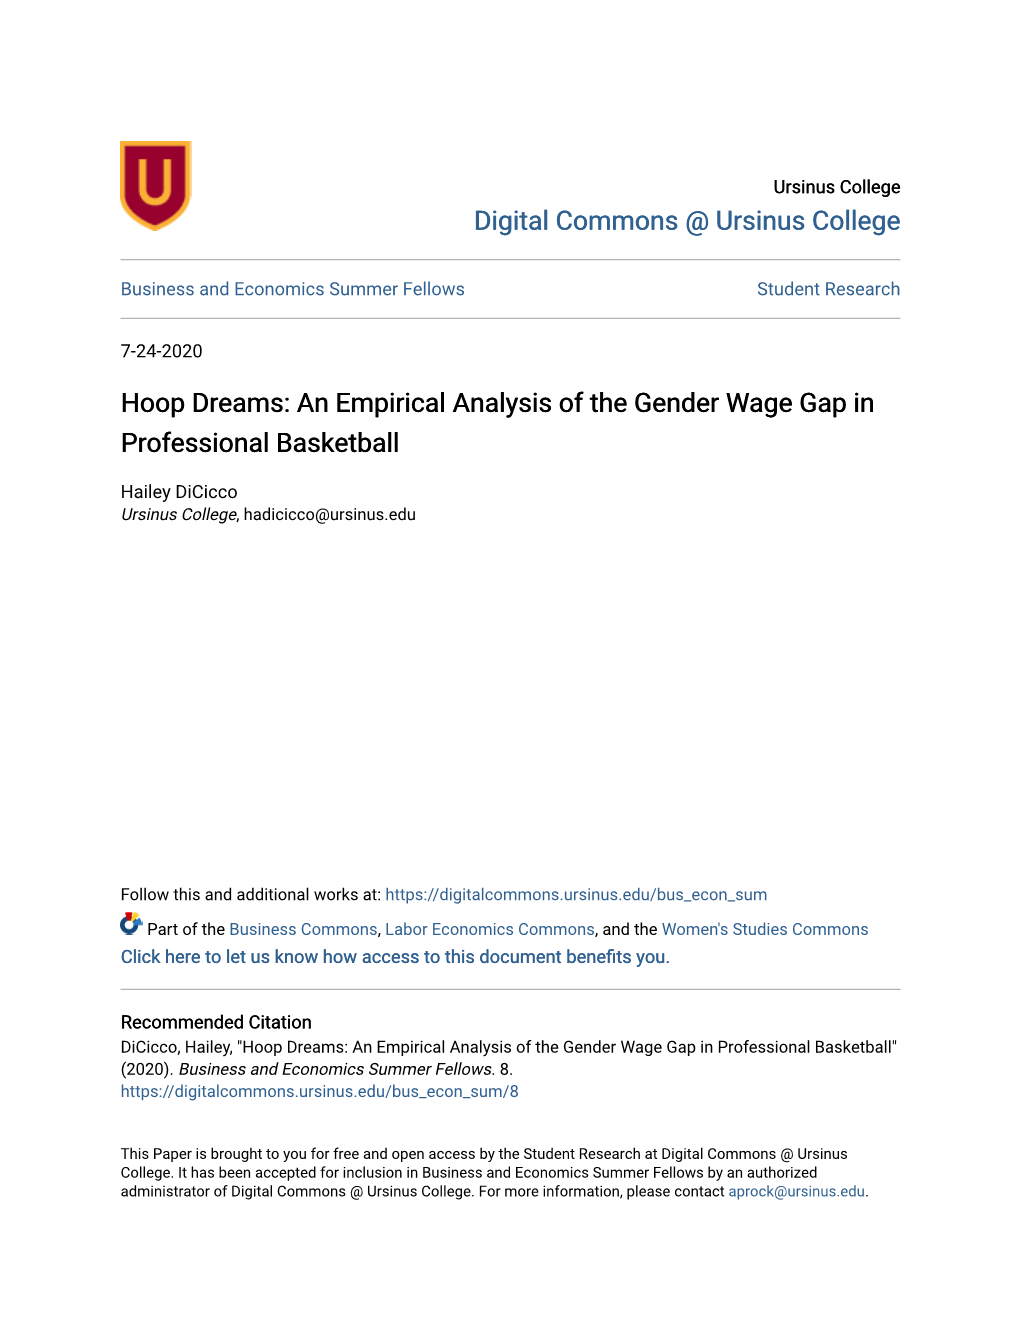 An Empirical Analysis of the Gender Wage Gap in Professional Basketball